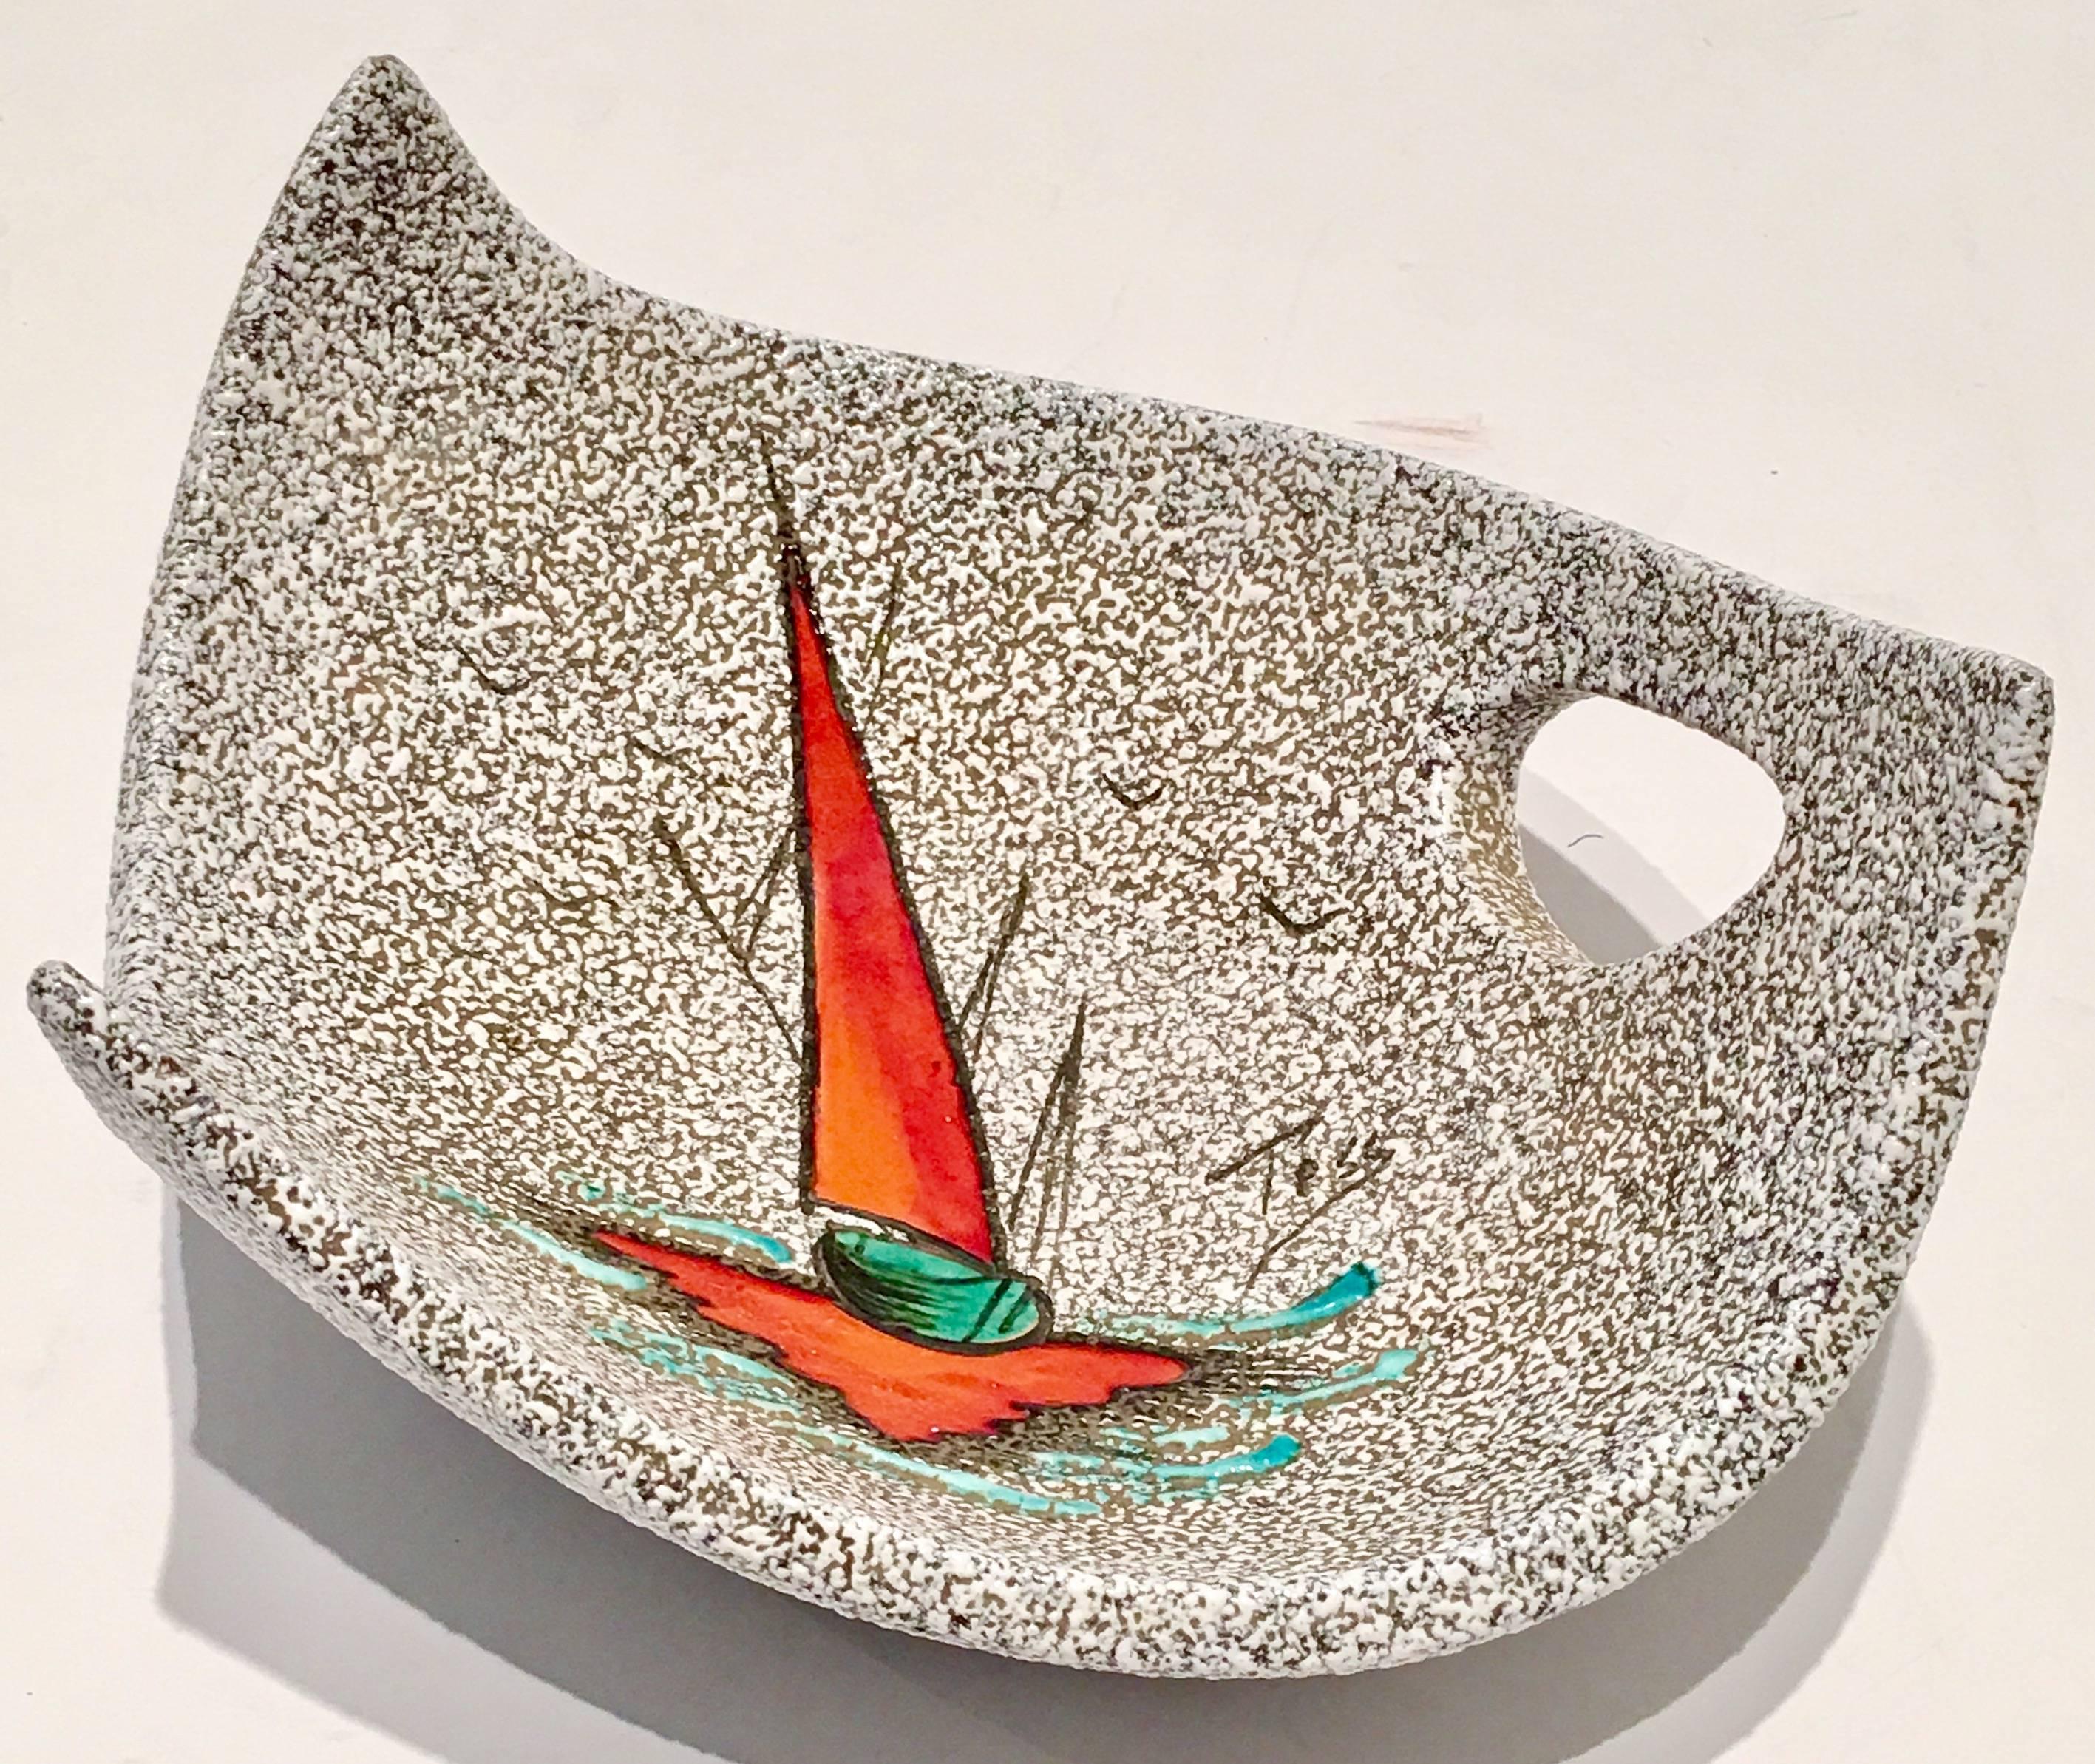 Rare quintessential Mid-Century Modern pair of abstract fish and sailboat Vallarius pottery dish and pitcher signed, Tesy. Incredible "lava" texture black and white abstract forms with cut-out handles. The abstract fish three point dish